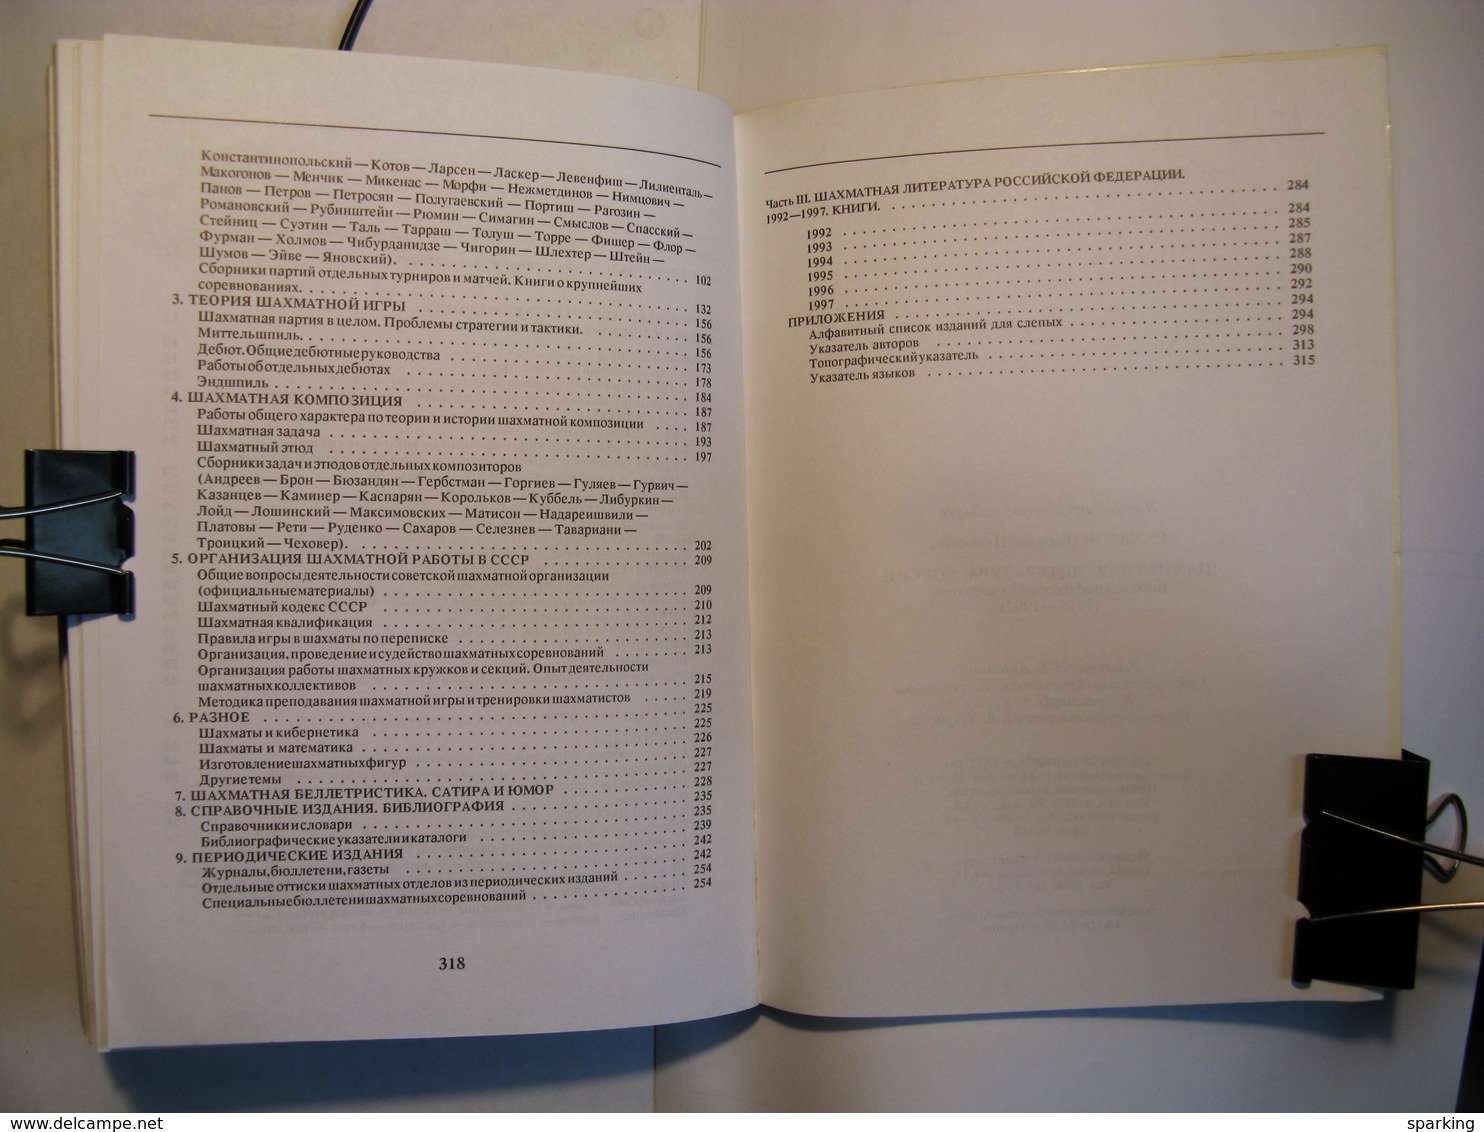 Chess literature of Russia. Bibliographic index (1775-1997) by Sakharov. 2001.